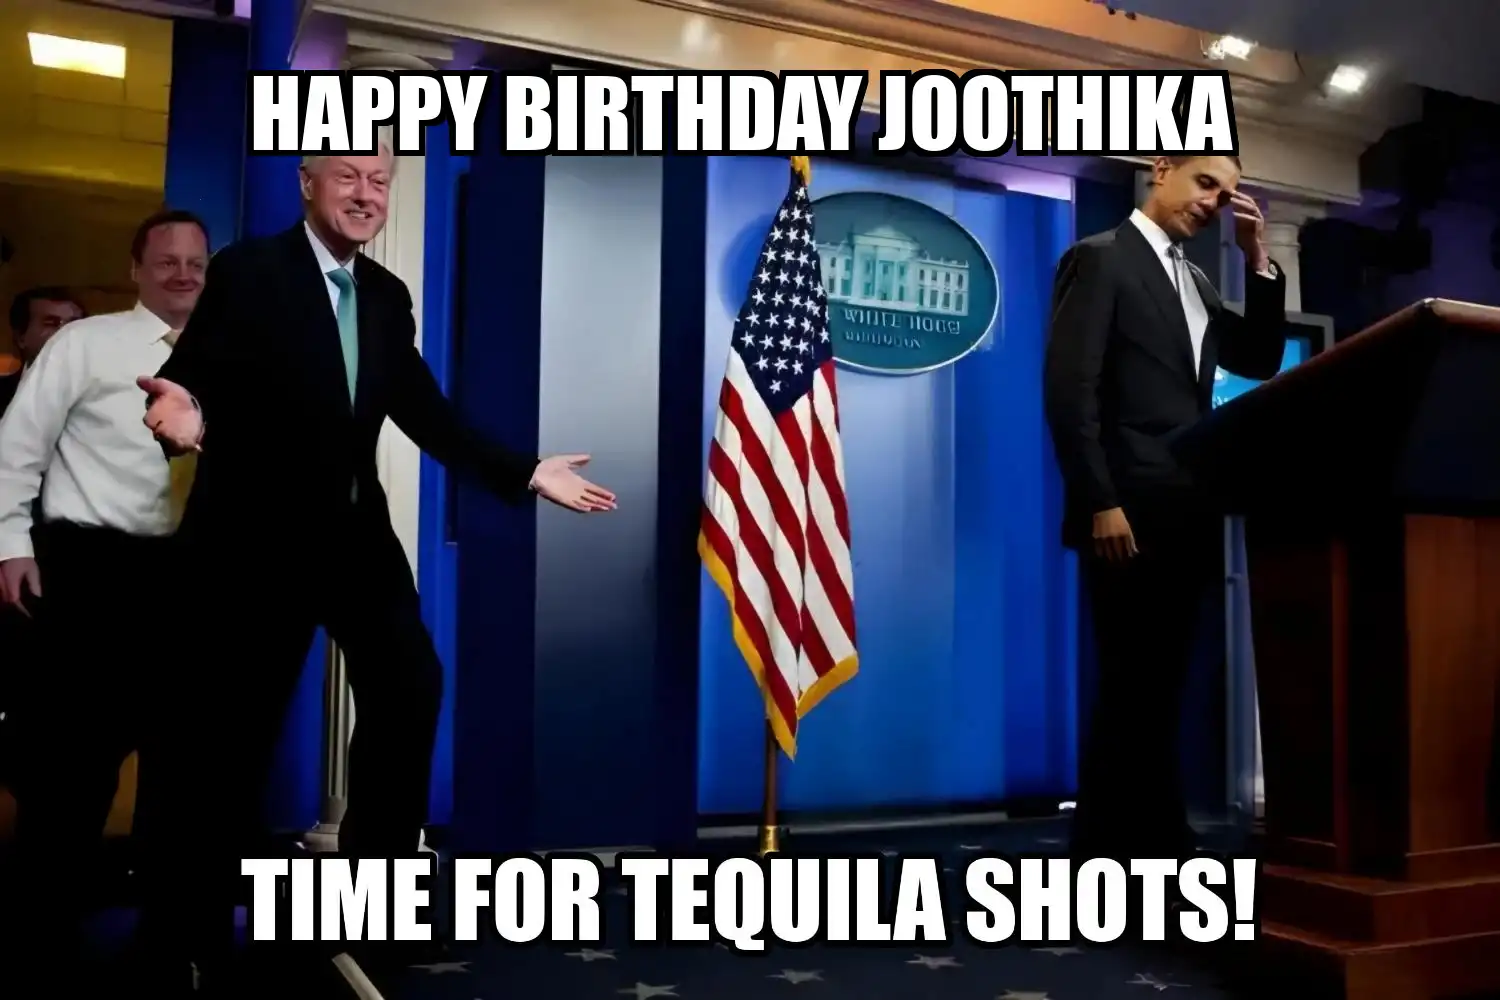 Happy Birthday Joothika Time For Tequila Shots Memes